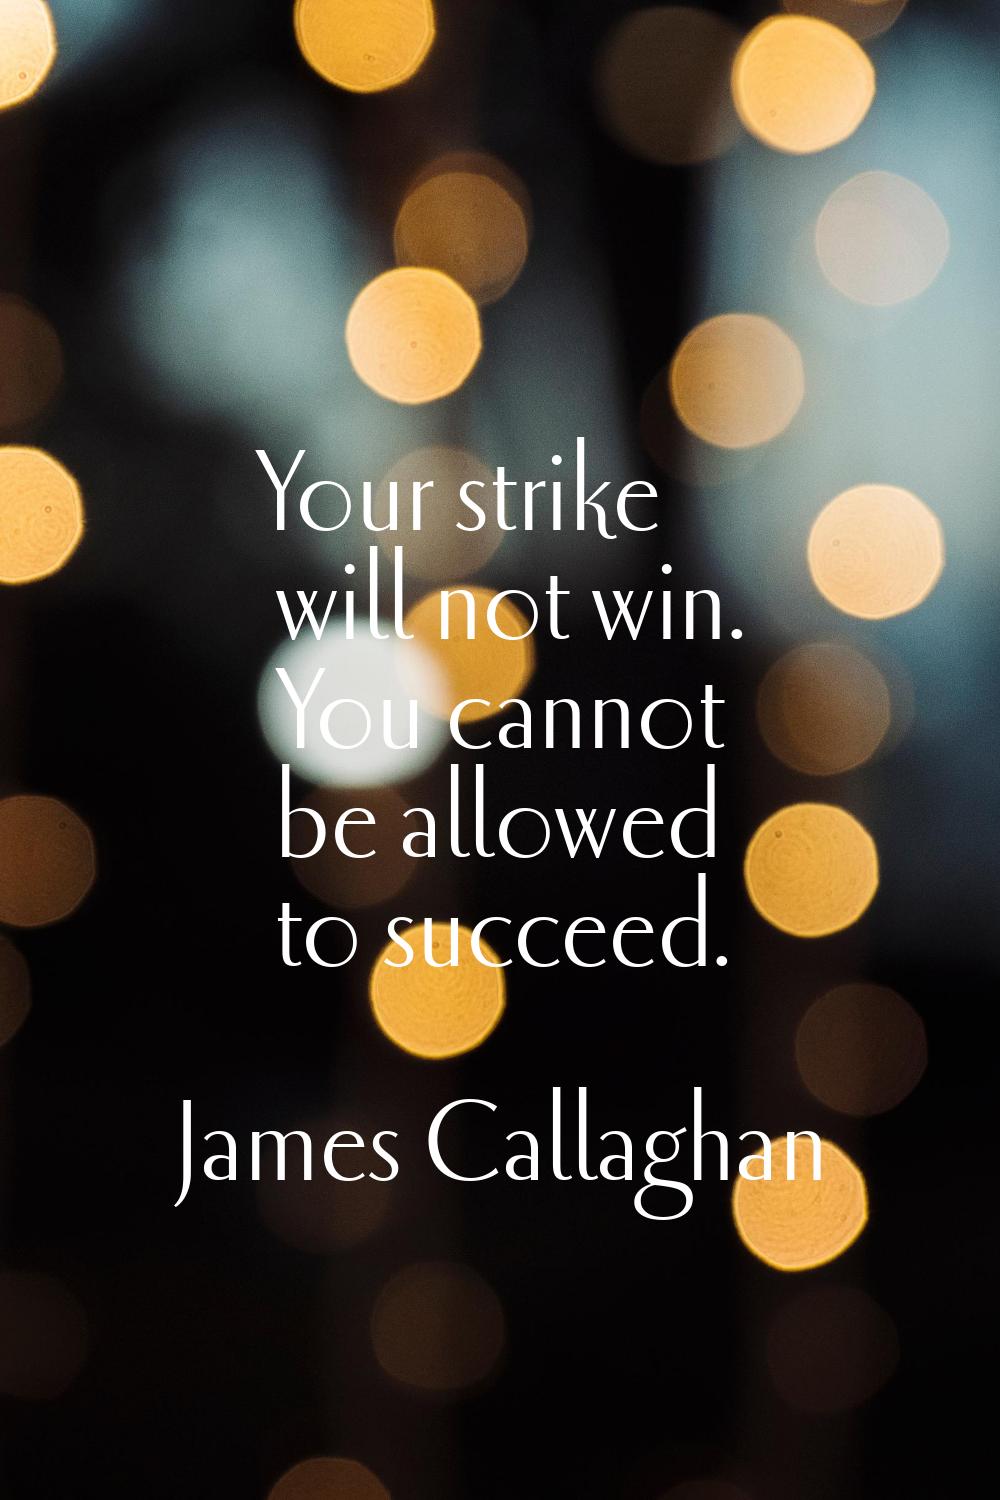 Your strike will not win. You cannot be allowed to succeed.